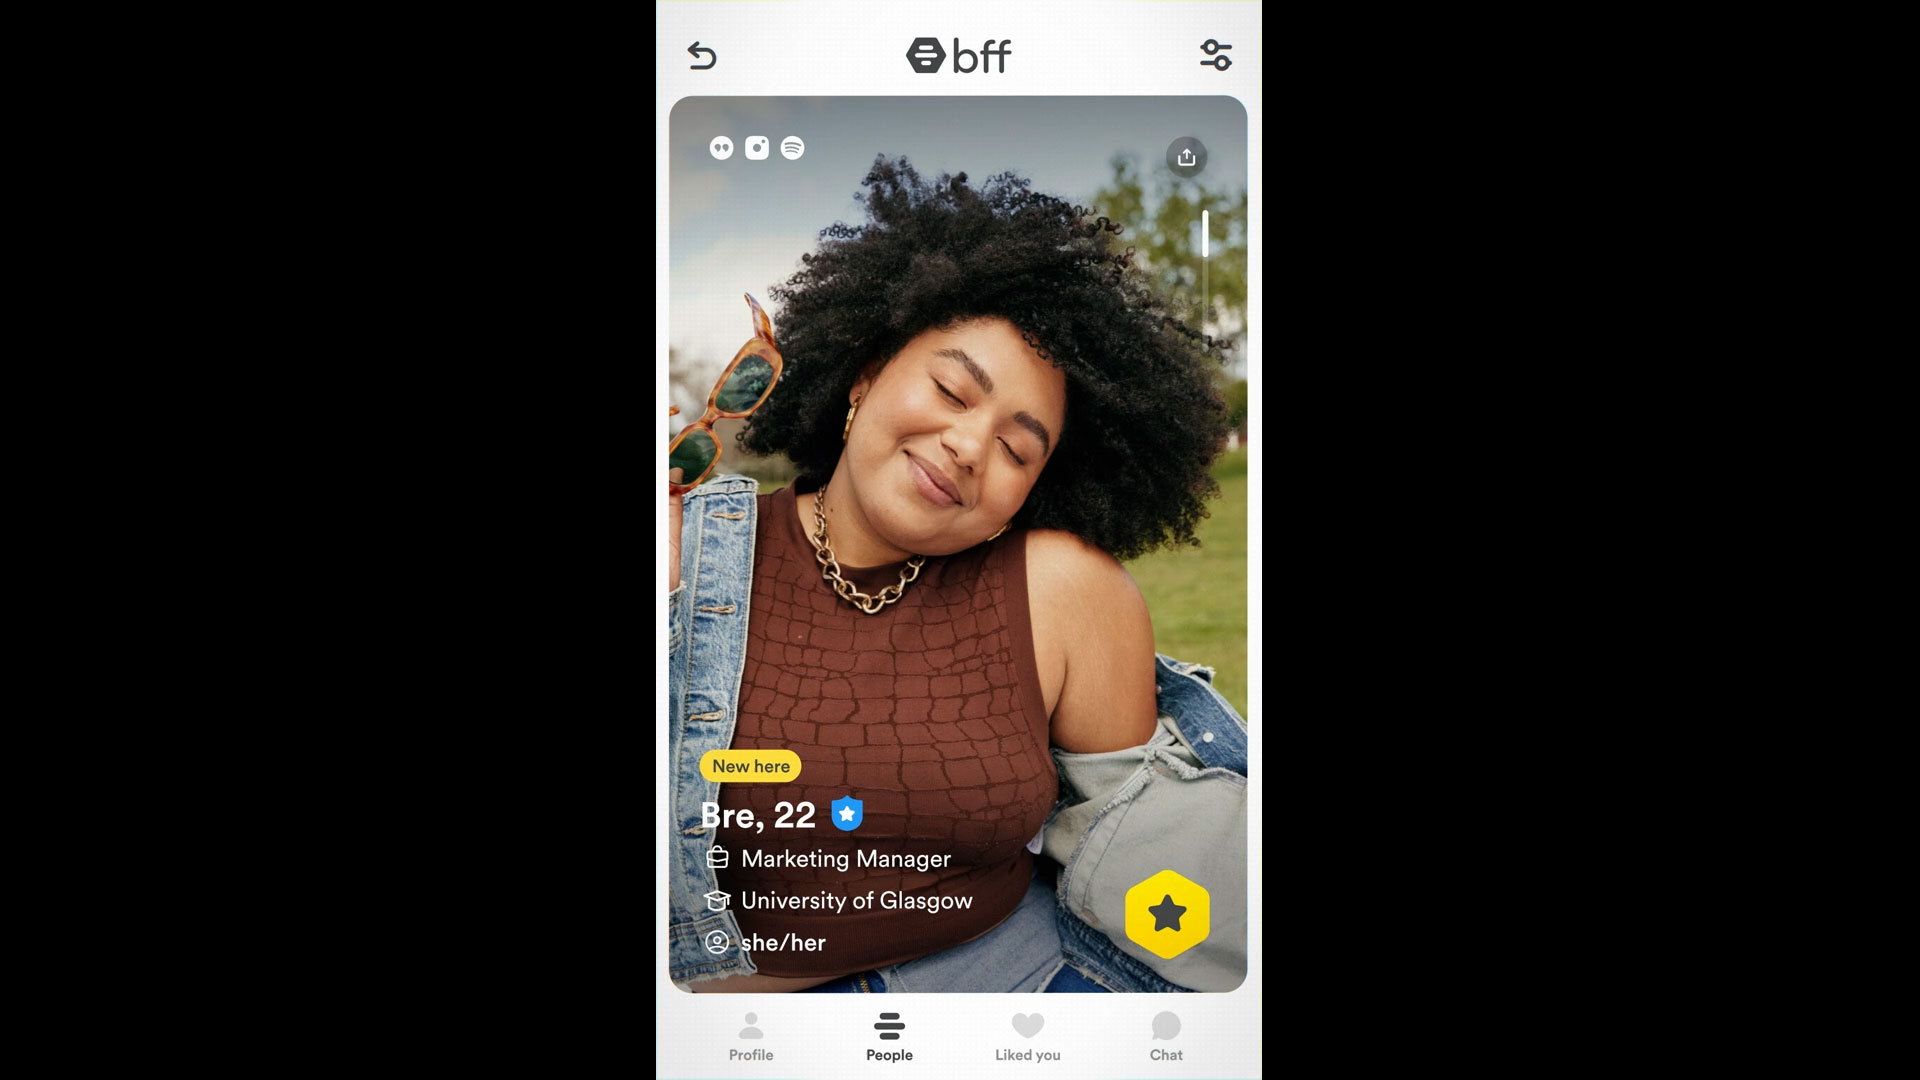 Bumble For Friends is a new app for finding friends. The app creates a way for people to grow their friendship circles by discovering meaningful, kind, and fun connections in their local area that is separate from the Bumble dating app.